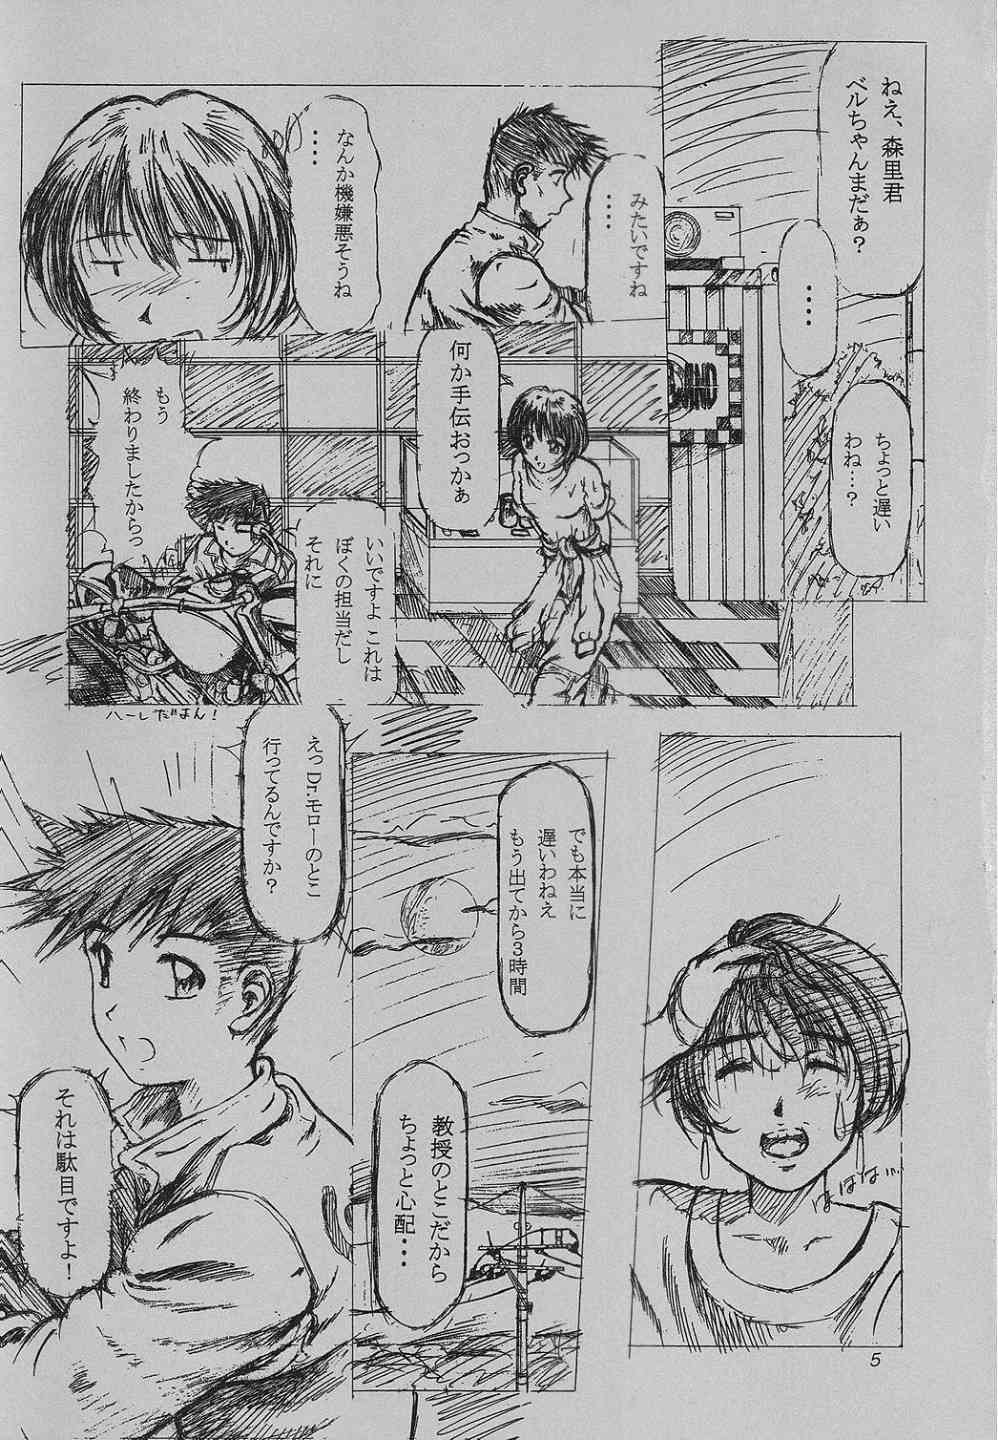 [INDURAIN] more carefully chapter 1/3 Prologue (Ah! Megami-sama/Ah! My Goddess) [INDURAIN] more carefully chapter 1/3 プロローグ (ああっ女神さまっ)